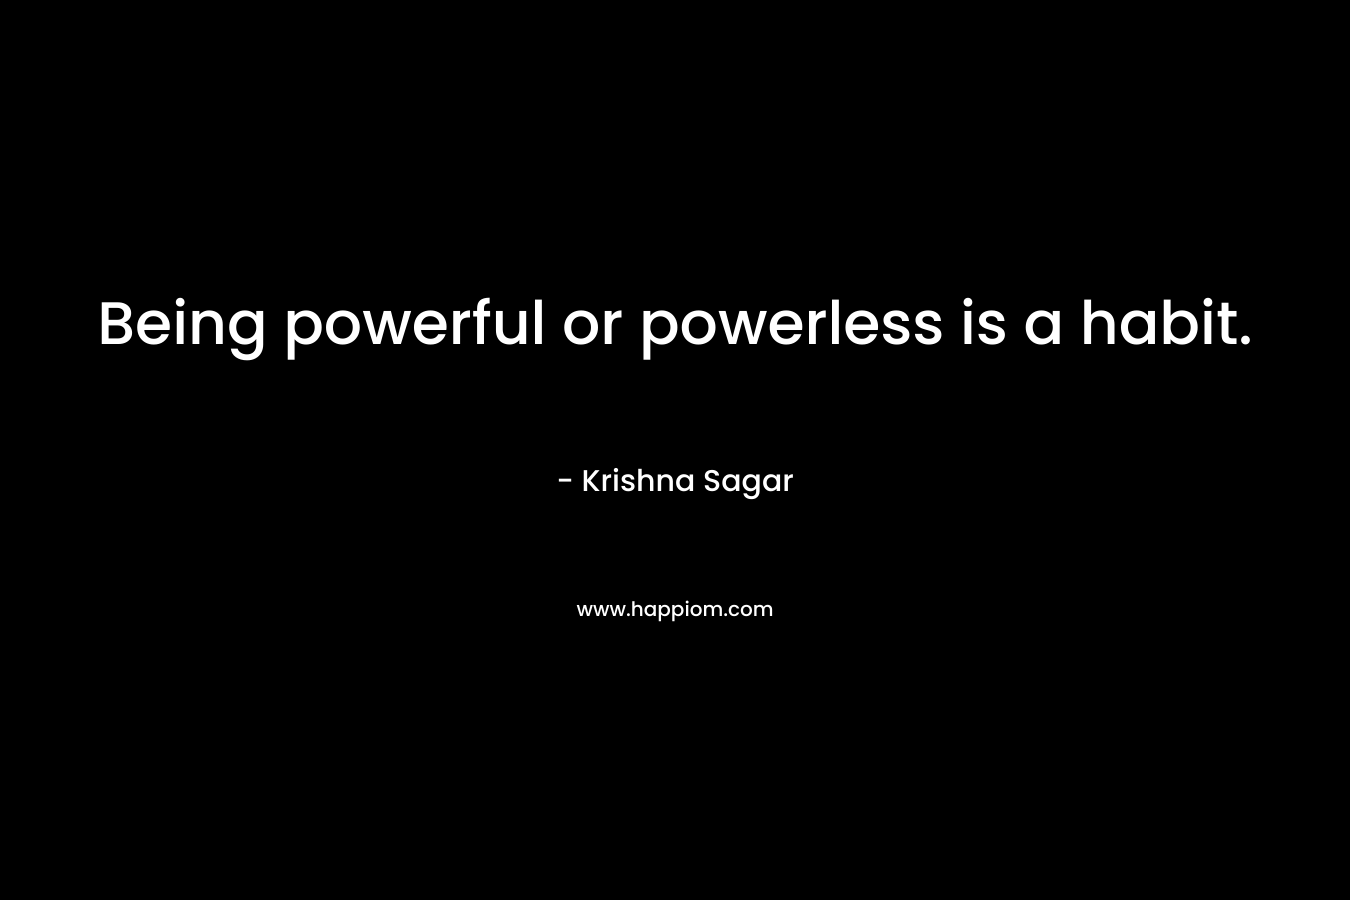 Being powerful or powerless is a habit.